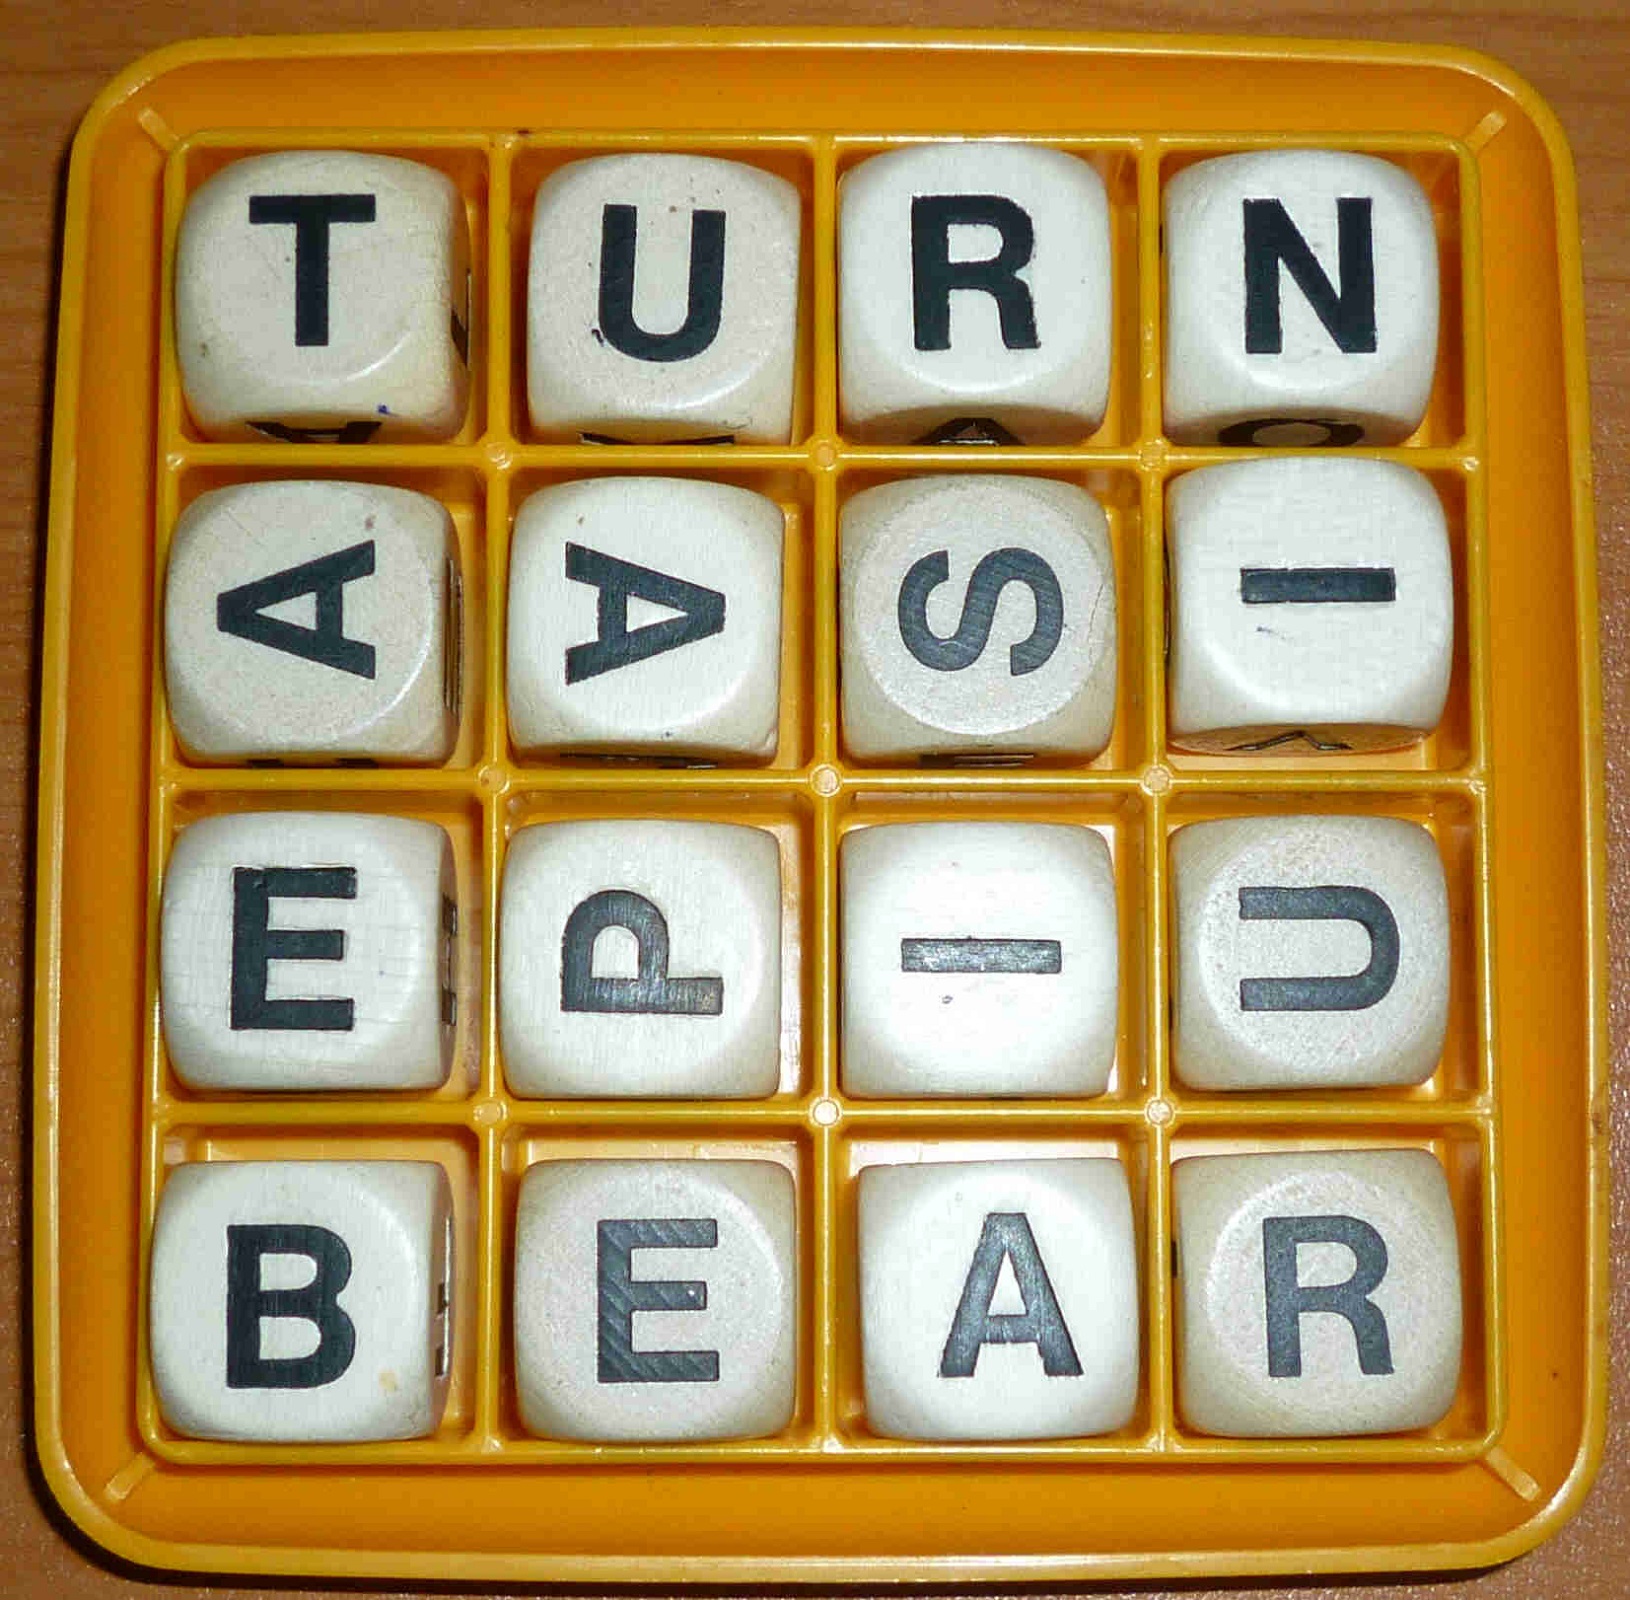 The Game Boggle Colour